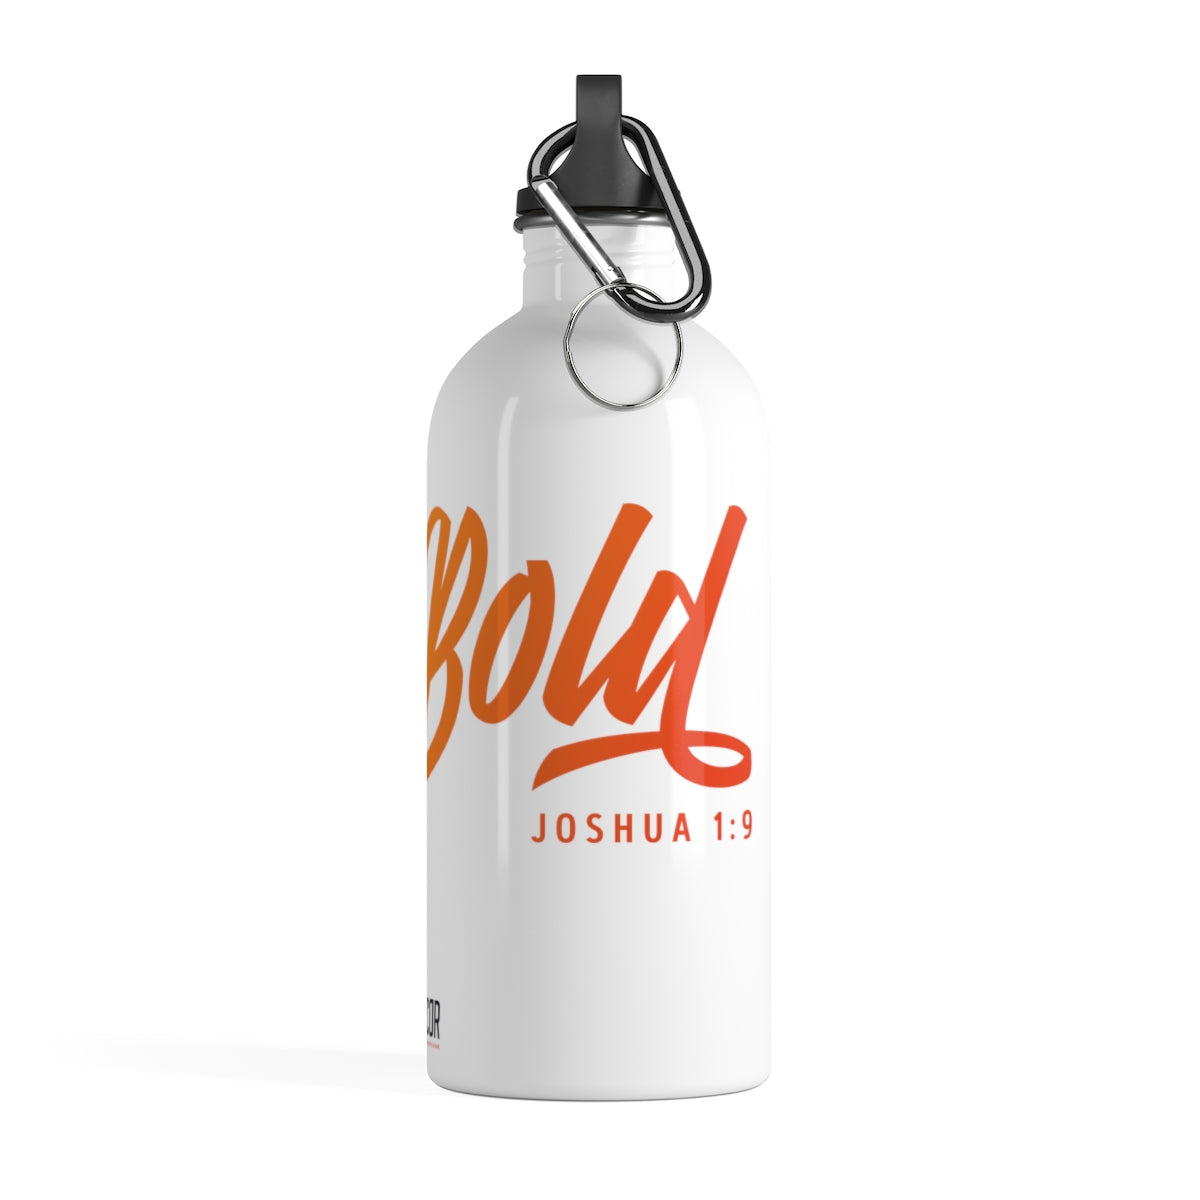 Be Bold | Stainless Steel Water Bottle